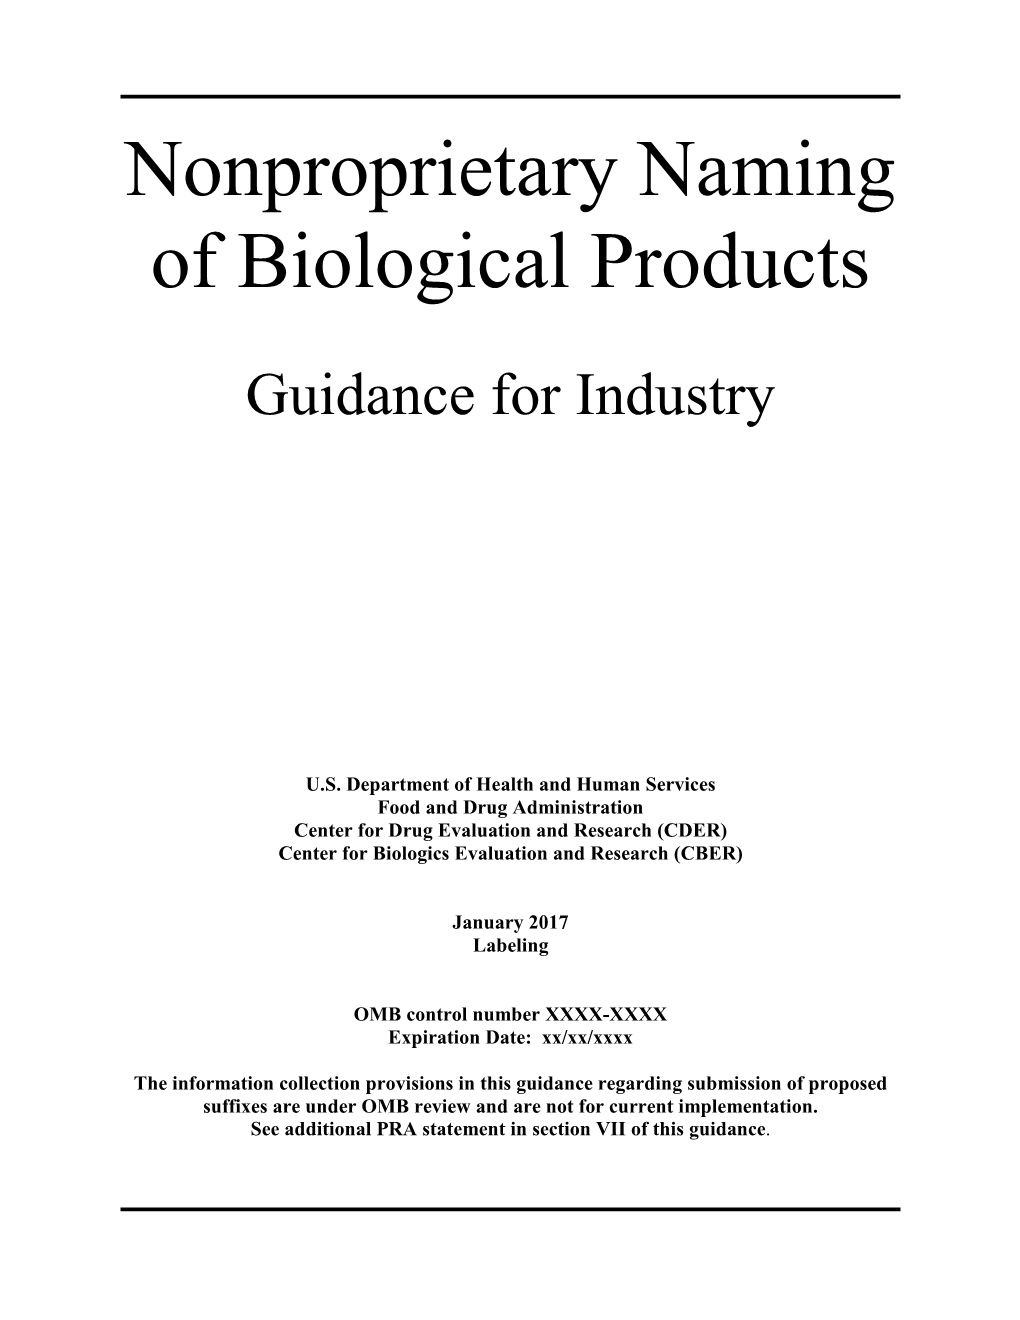 Nonproprietary Naming of Biological Products Guidance for Industry